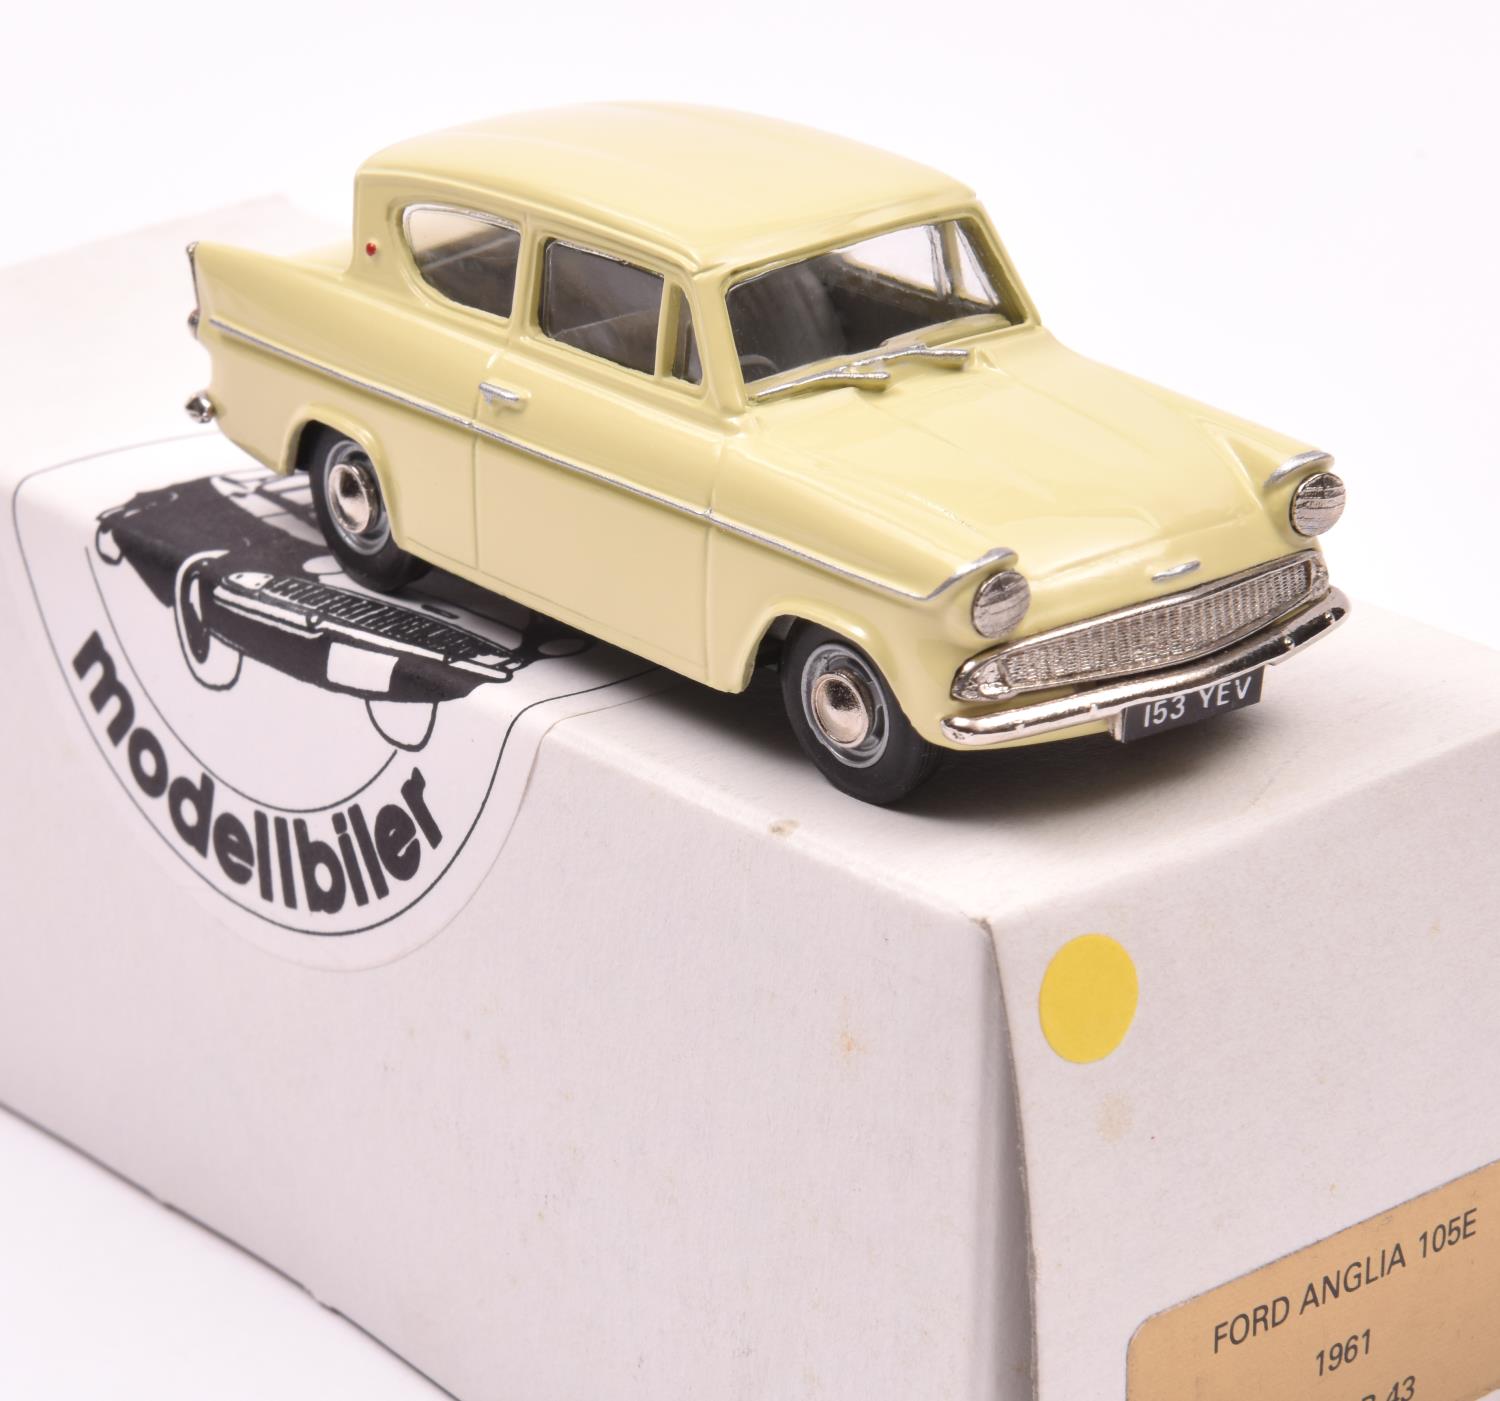 Pathfinder for Minicar 43, 1961 Ford Anglia 105E. A R.H.D. example in primrose yellow with light